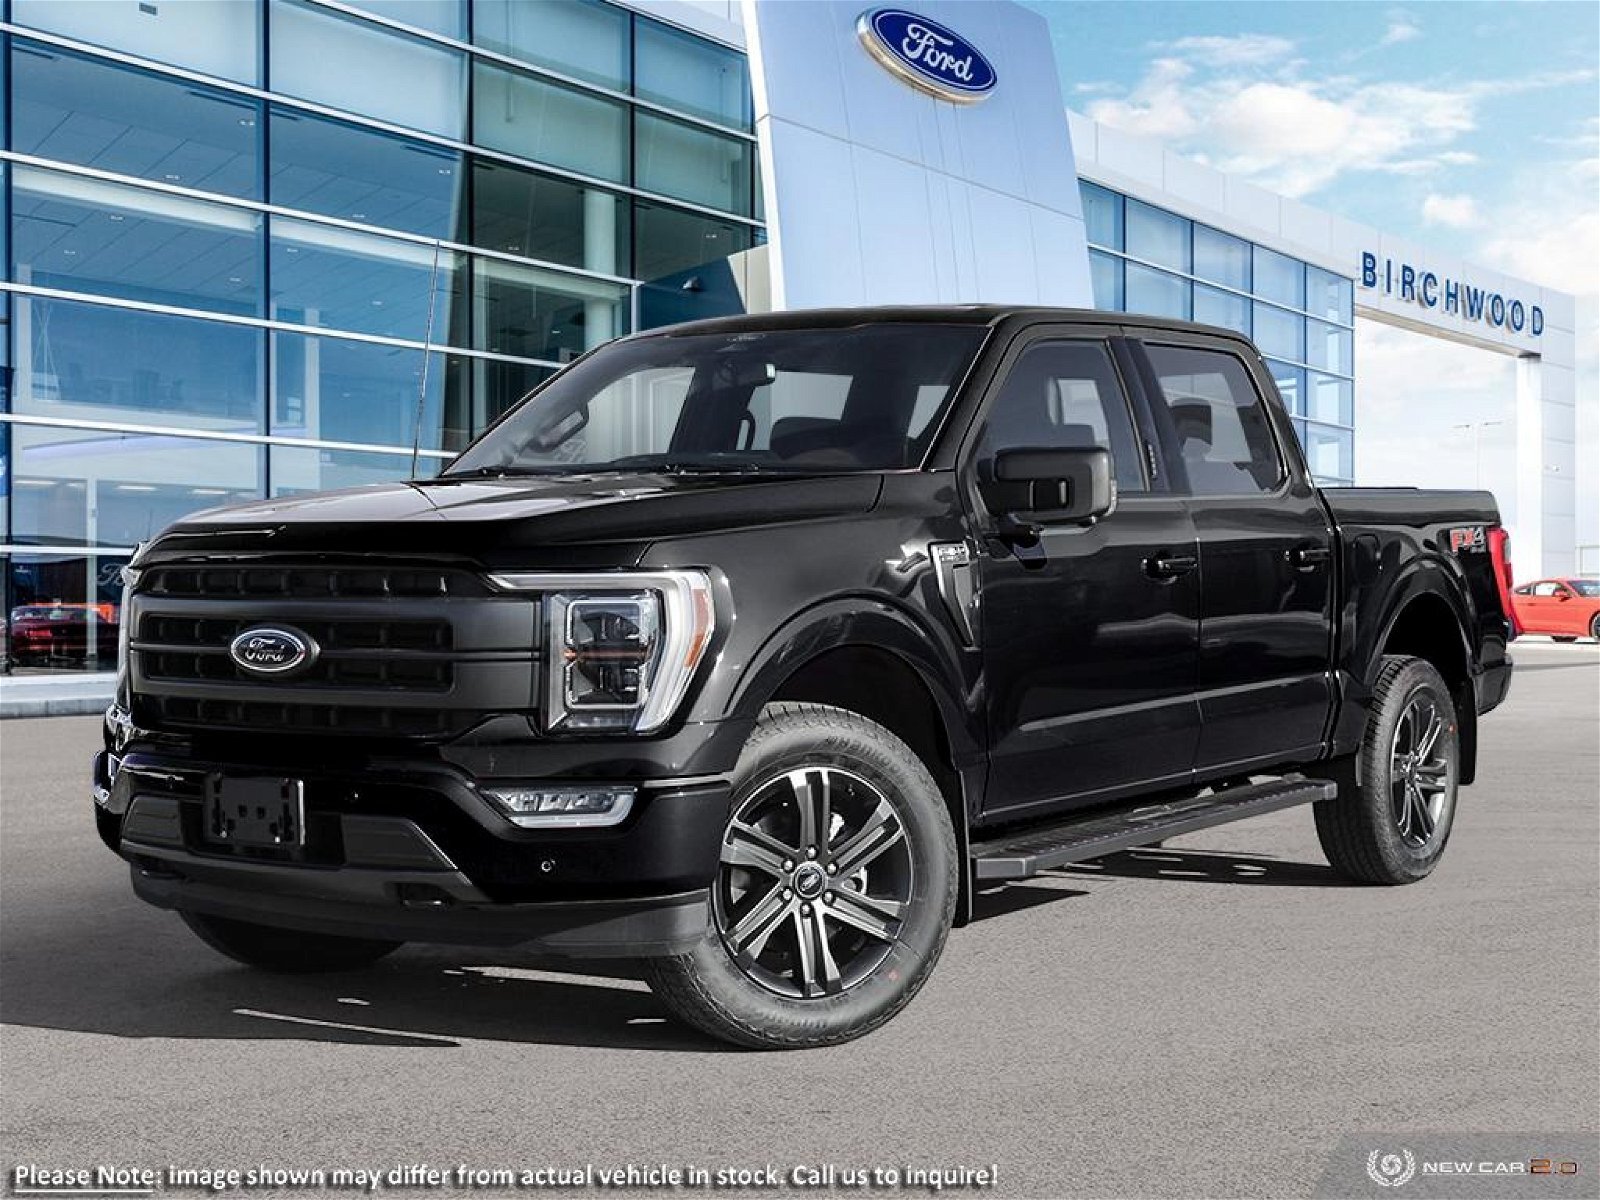 2023 Ford F-150 LARIAT DEMO Blowout - $14116 OFF